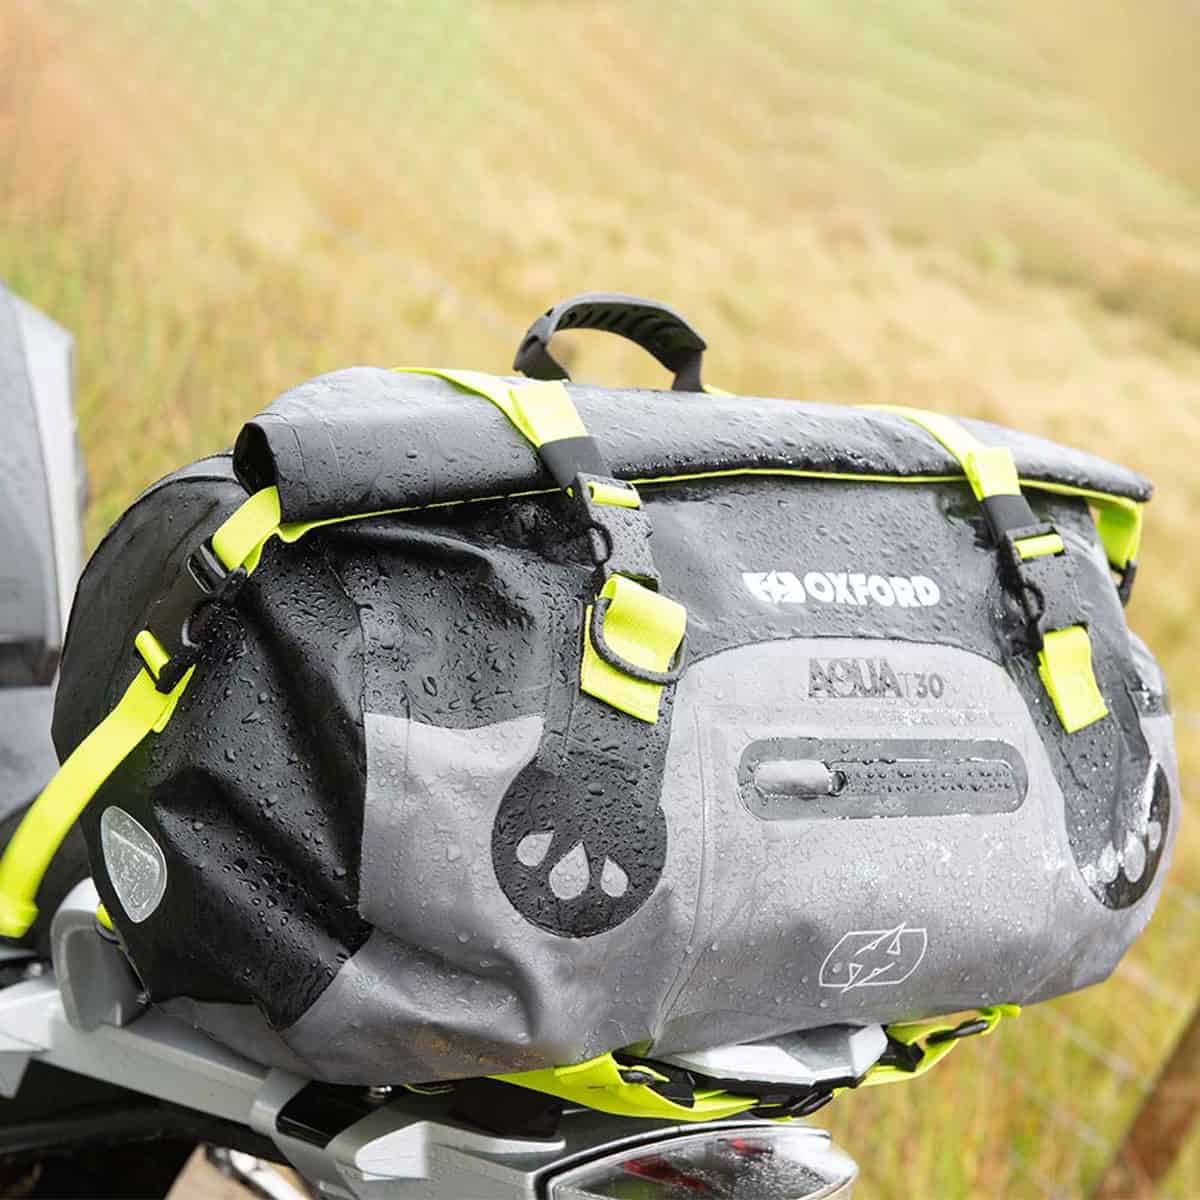 The Oxford Aqua T-30 Waterproof Roll Bag is one of the easiest ways to get your gear from A to B, safe and dry.